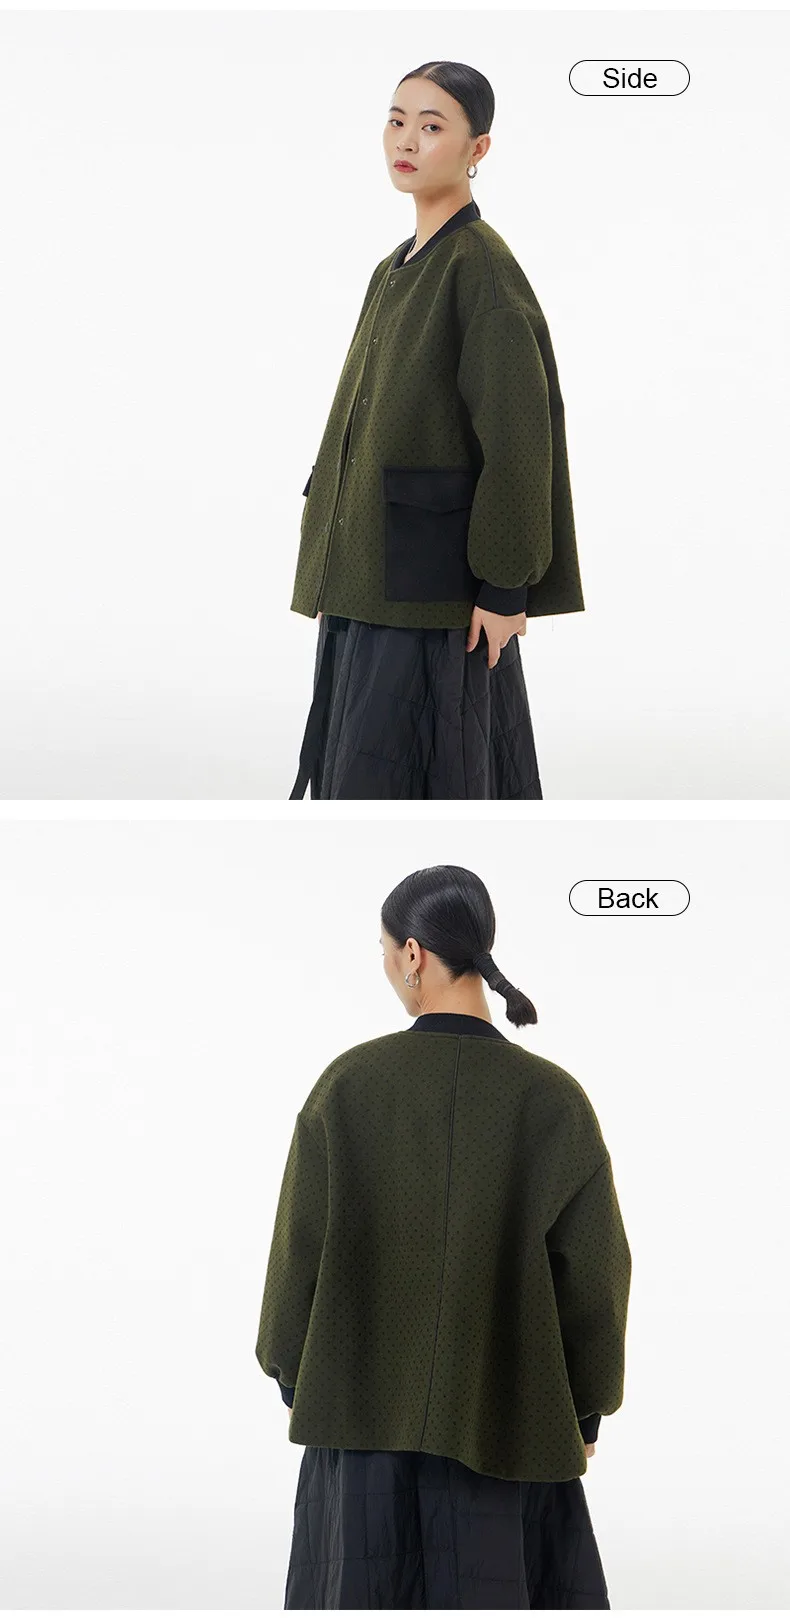 Japanese Stand Collar Coat  Women’s simple everything mandarin collars womens loose thin contrast color shirts coats for woman in khaki dark bottle green  Japan Fall autumn winter spring outerwear jackets fashion season